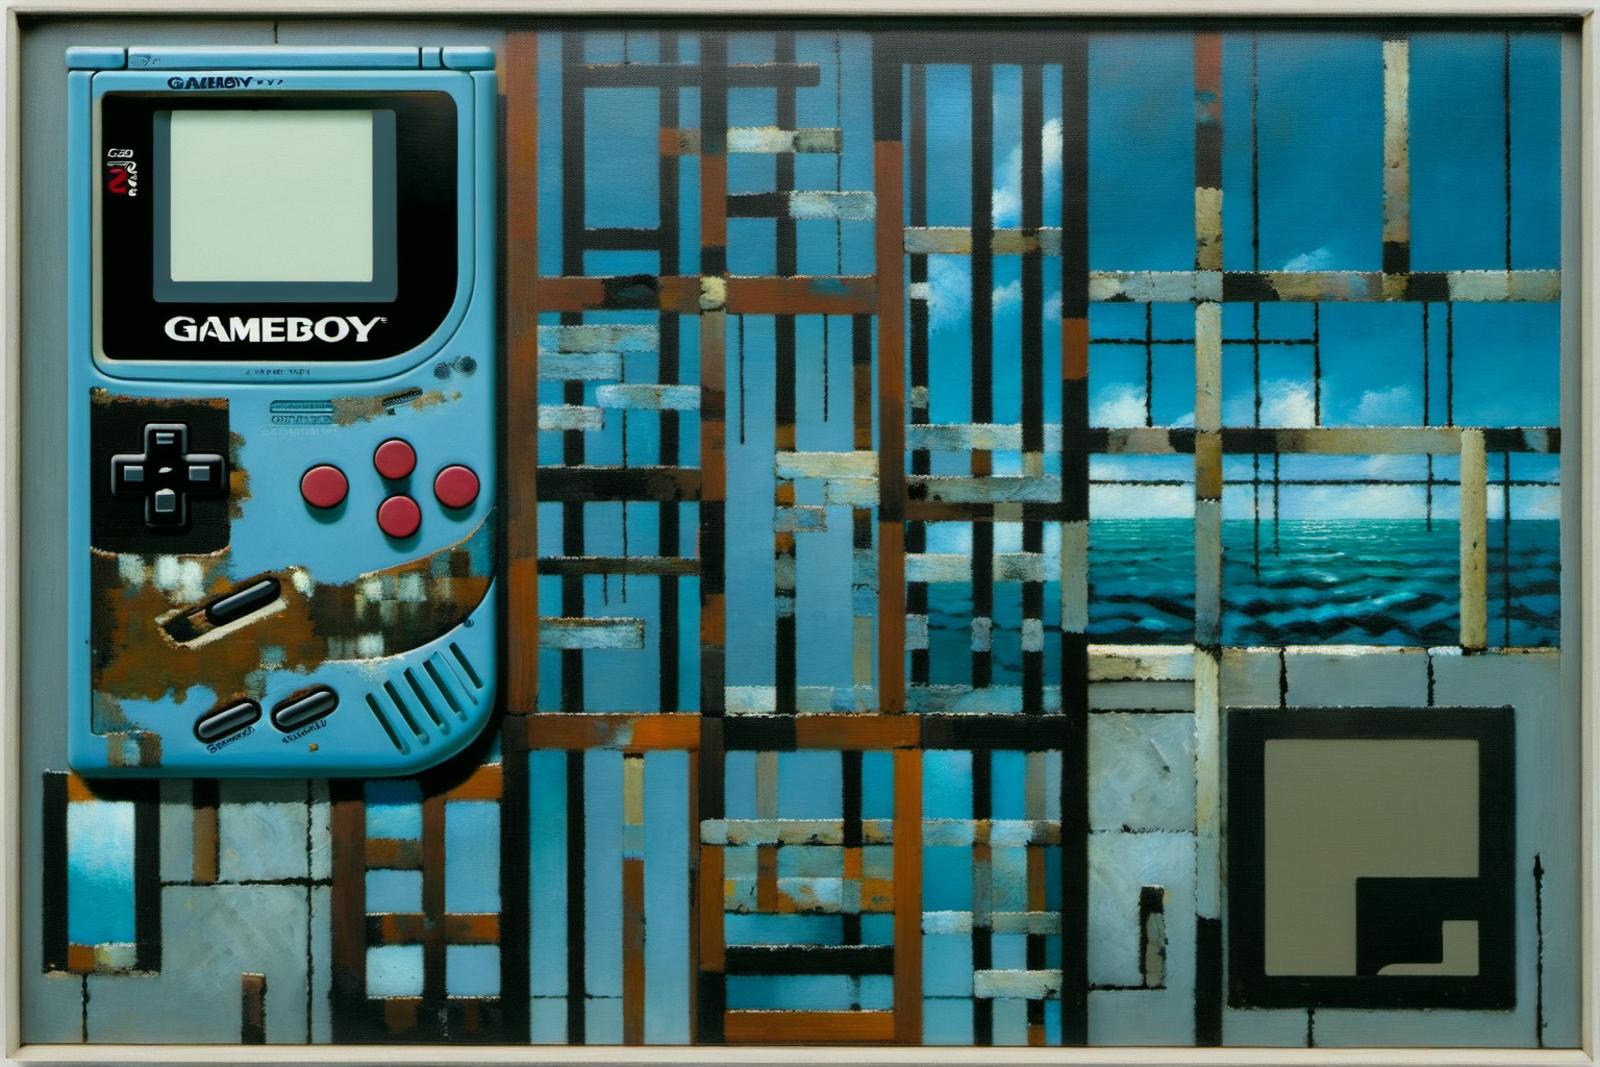 A painting of an old Nintendo Gameboy with the sky in the background.